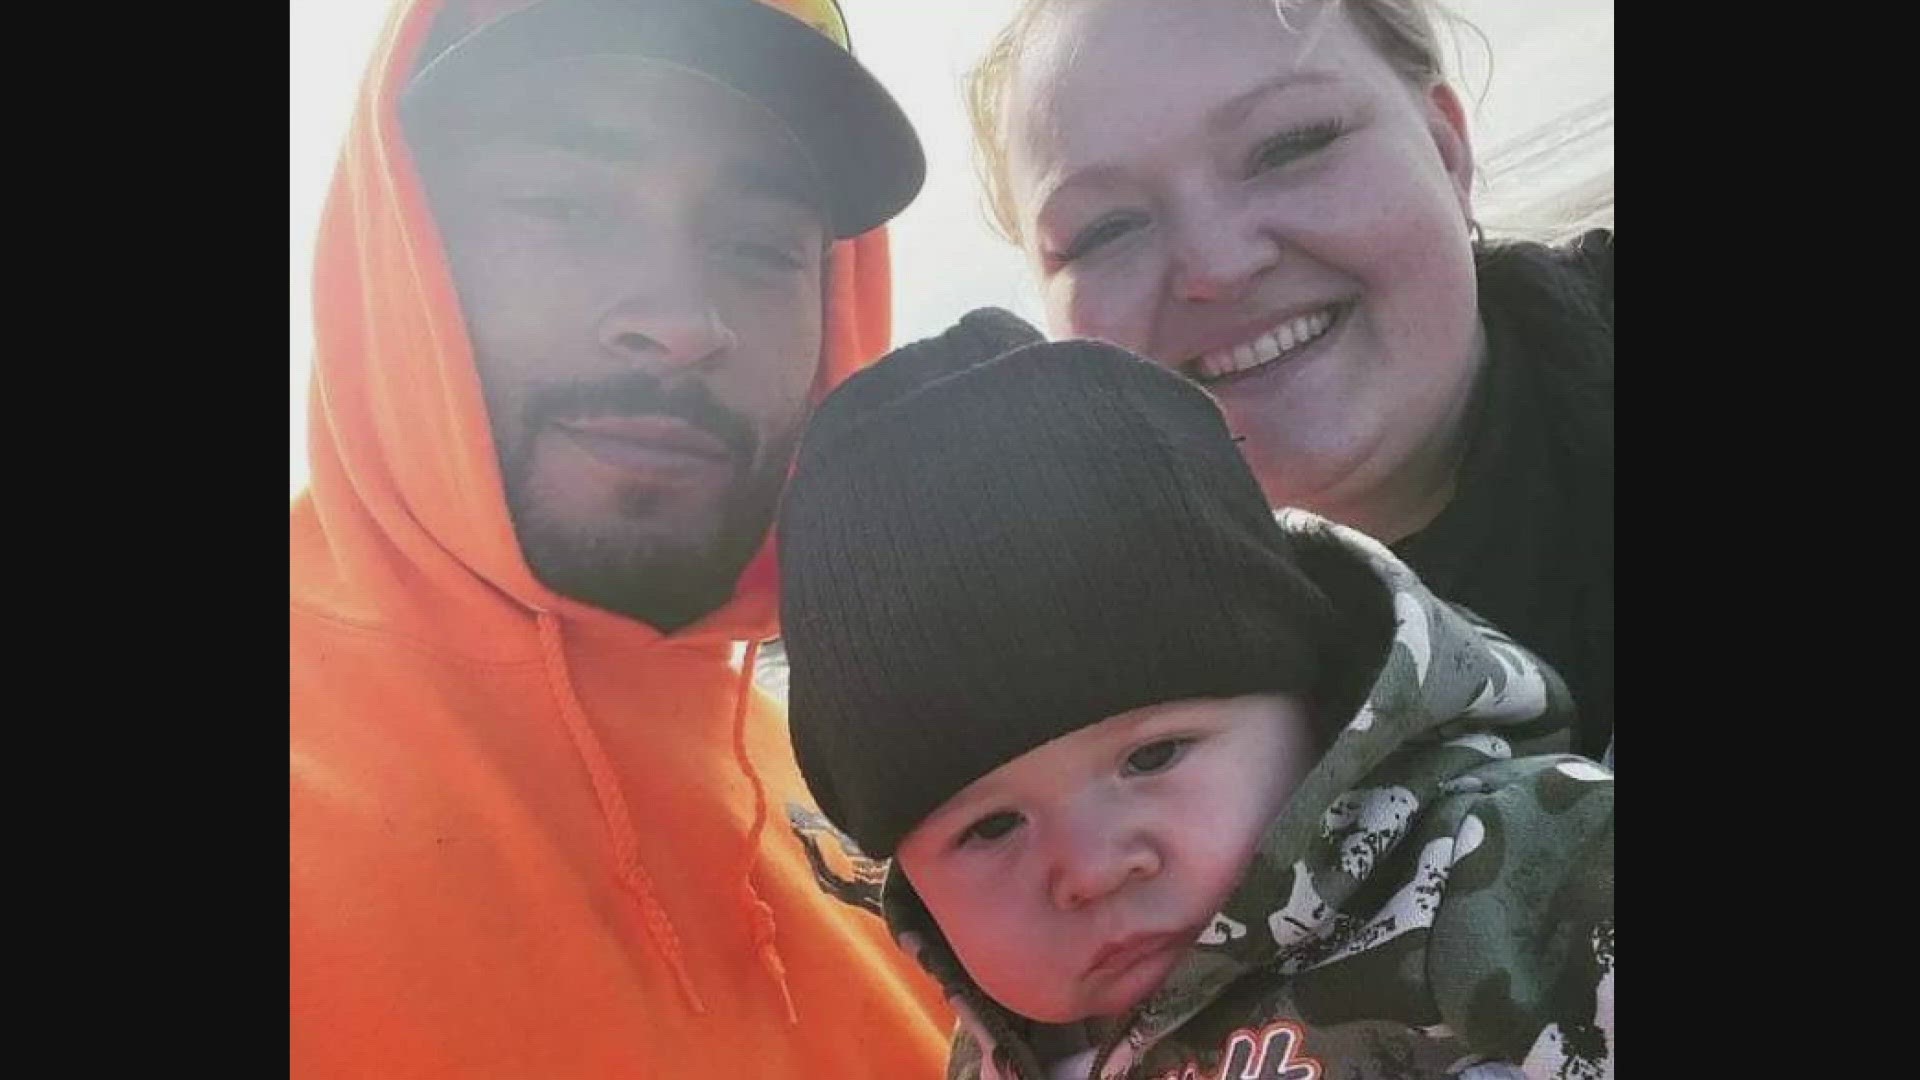 31-year-old Samantha Denney, who was killed along with her 2-year-old son by a suspected DUI driver on I-5  in Olympia, was pregnant at the time of the crash.